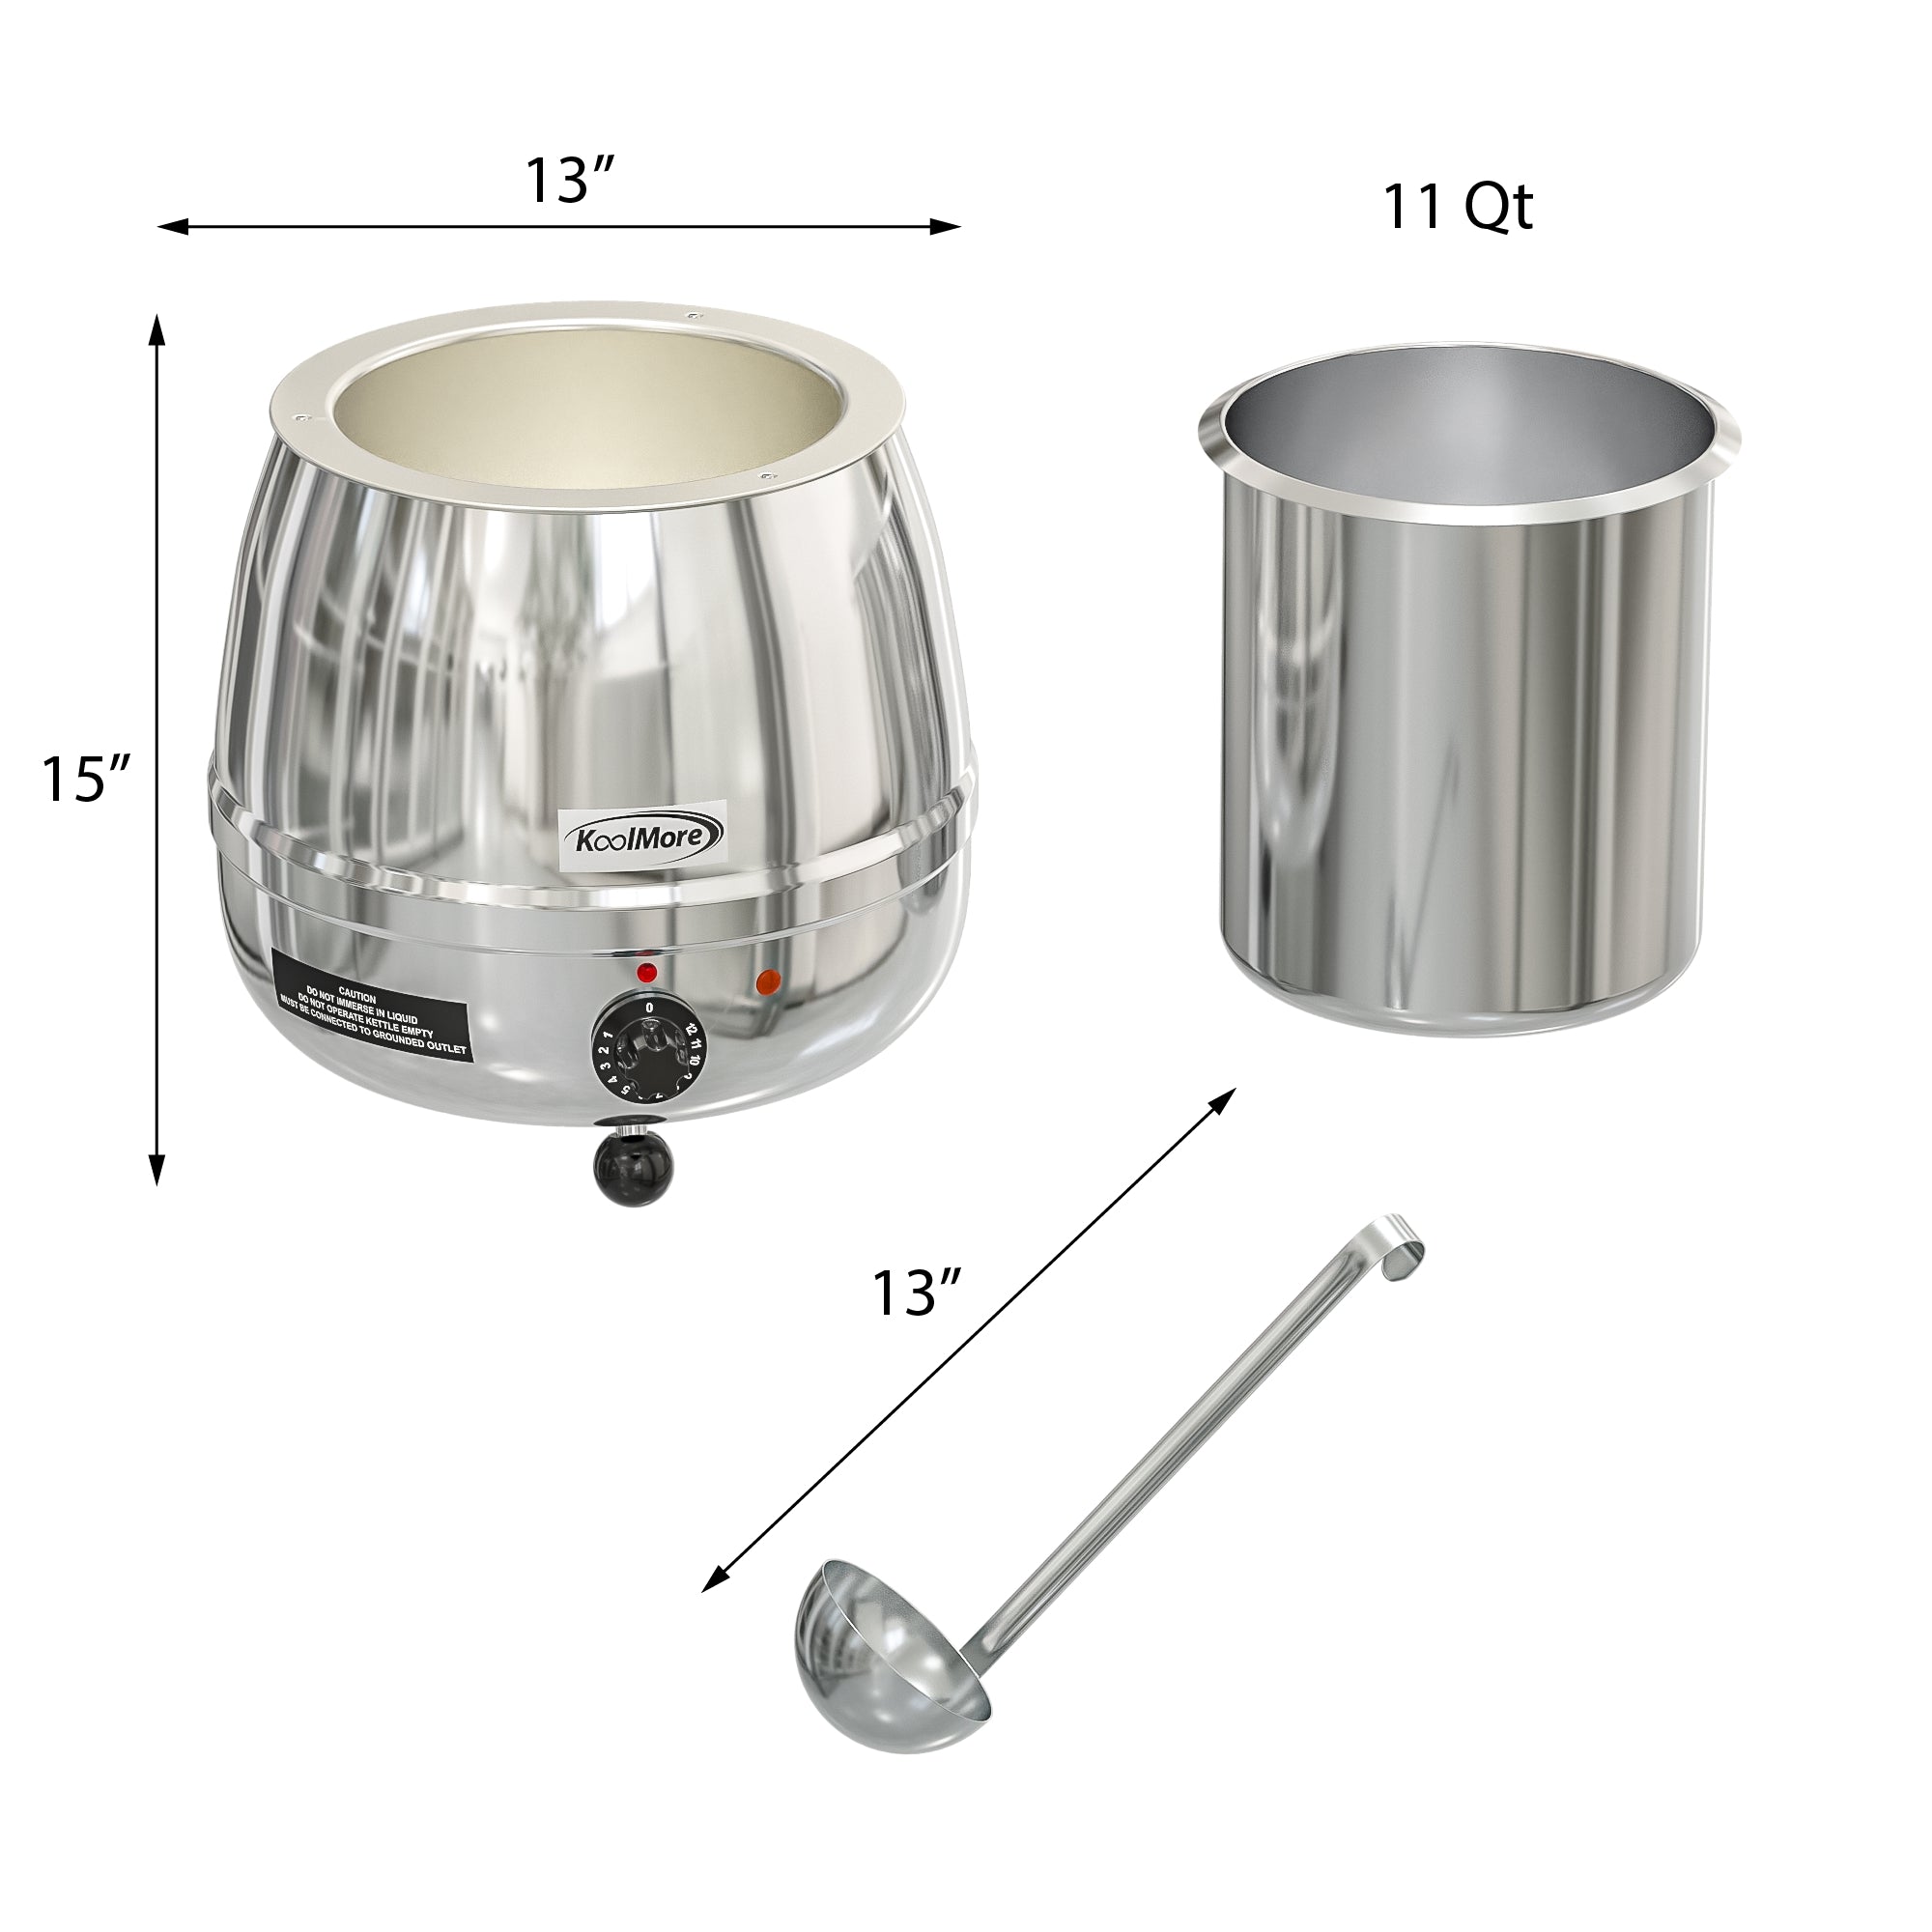 C105 Hot Sale Electric 10L Soup Kettle With Stainless Steel Lid - Buy C105  Hot Sale Electric 10L Soup Kettle With Stainless Steel Lid Product on